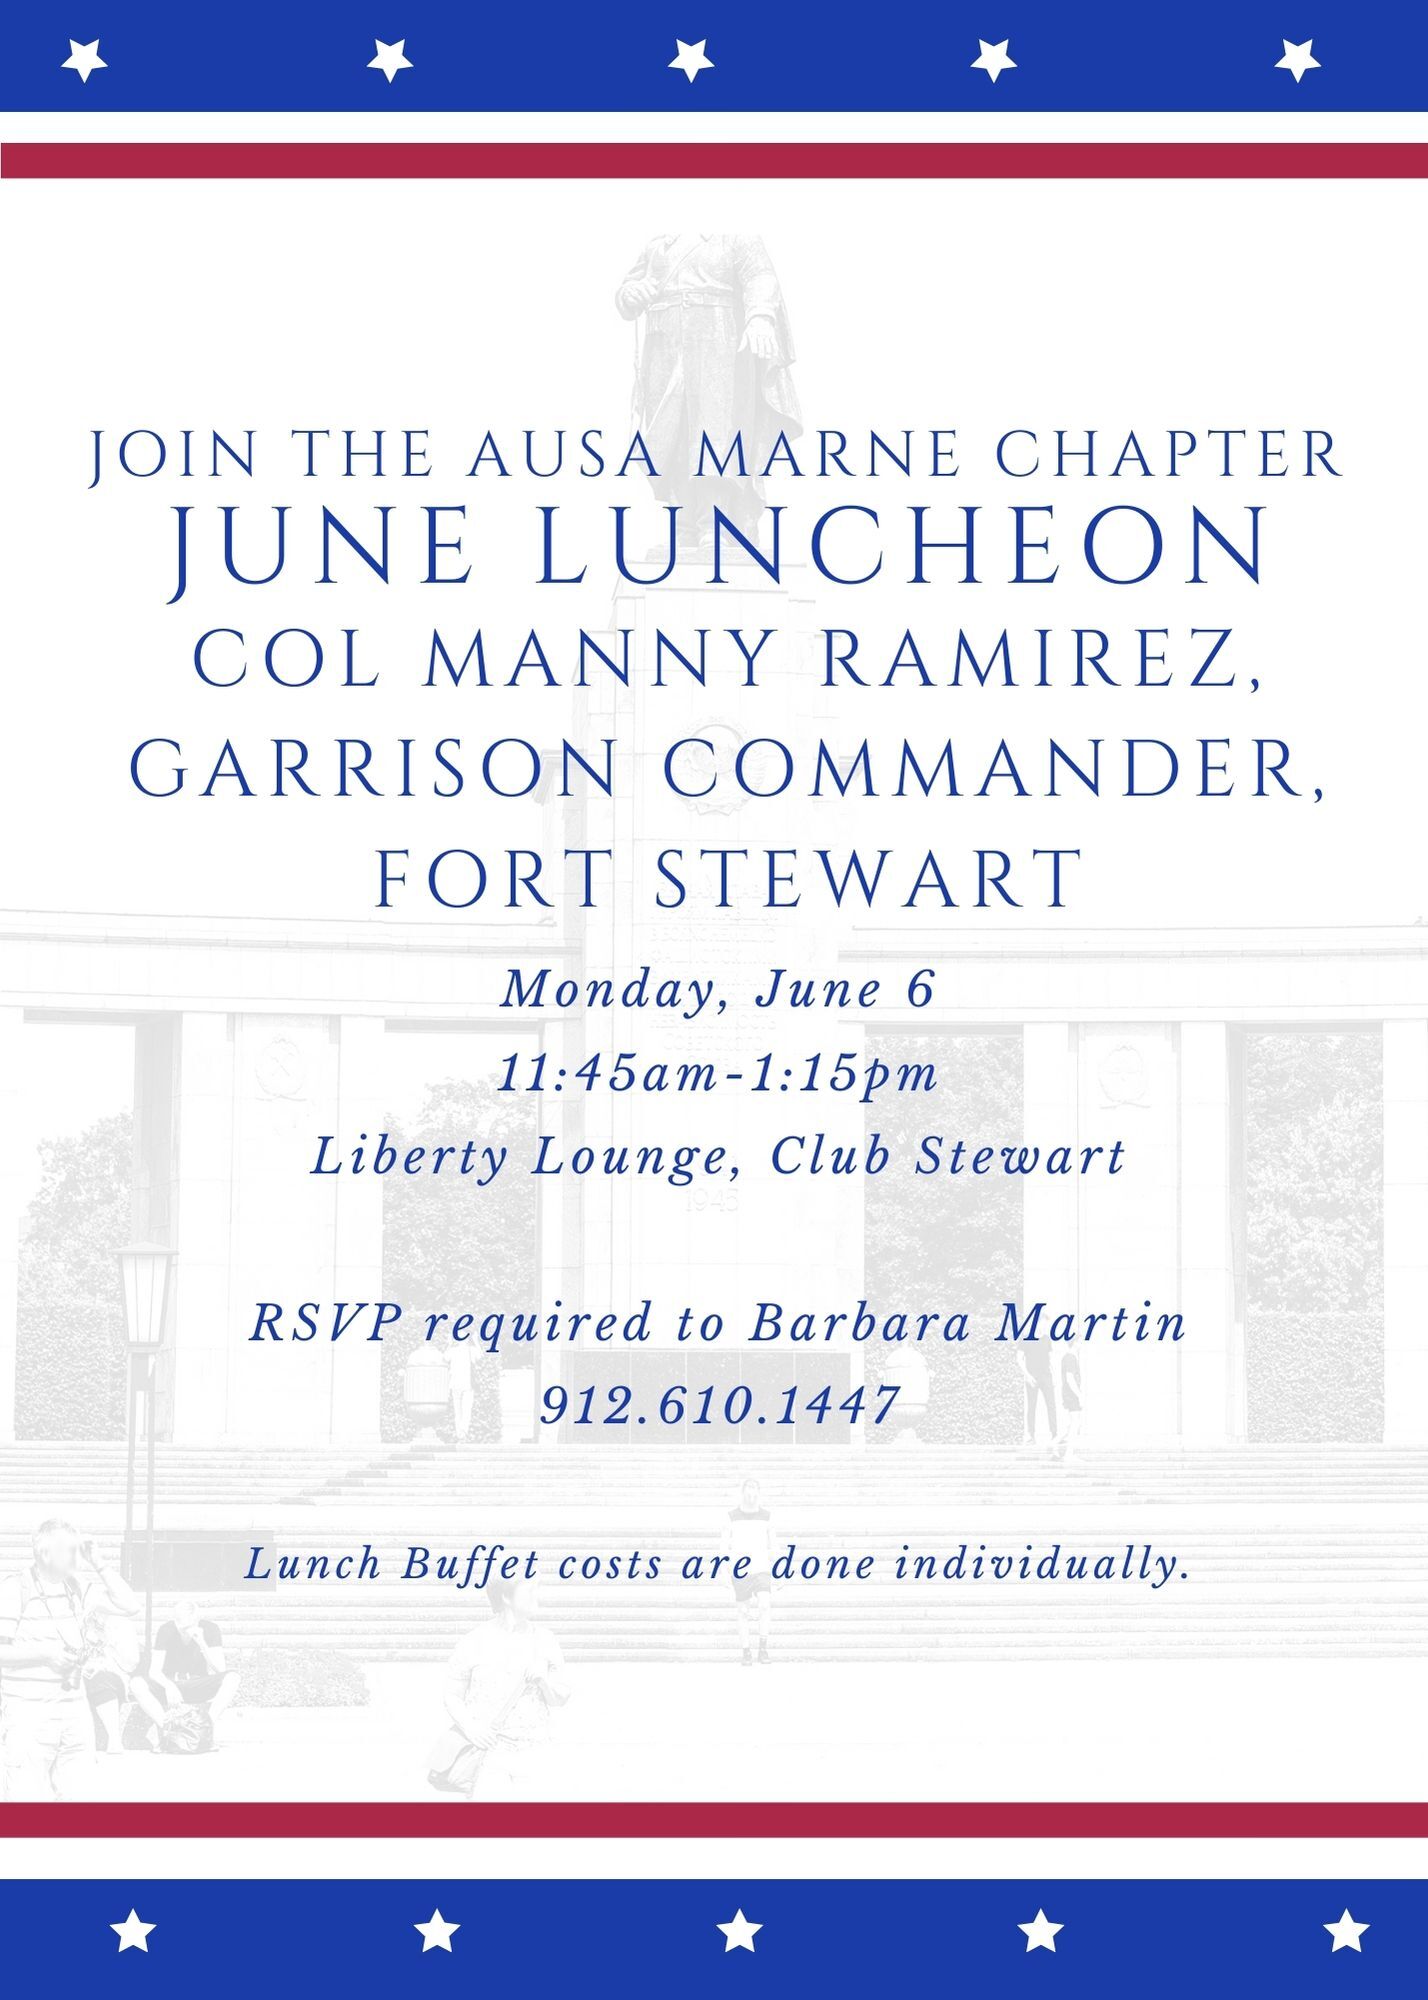 AUSA Marne Chapter June Luncheon information